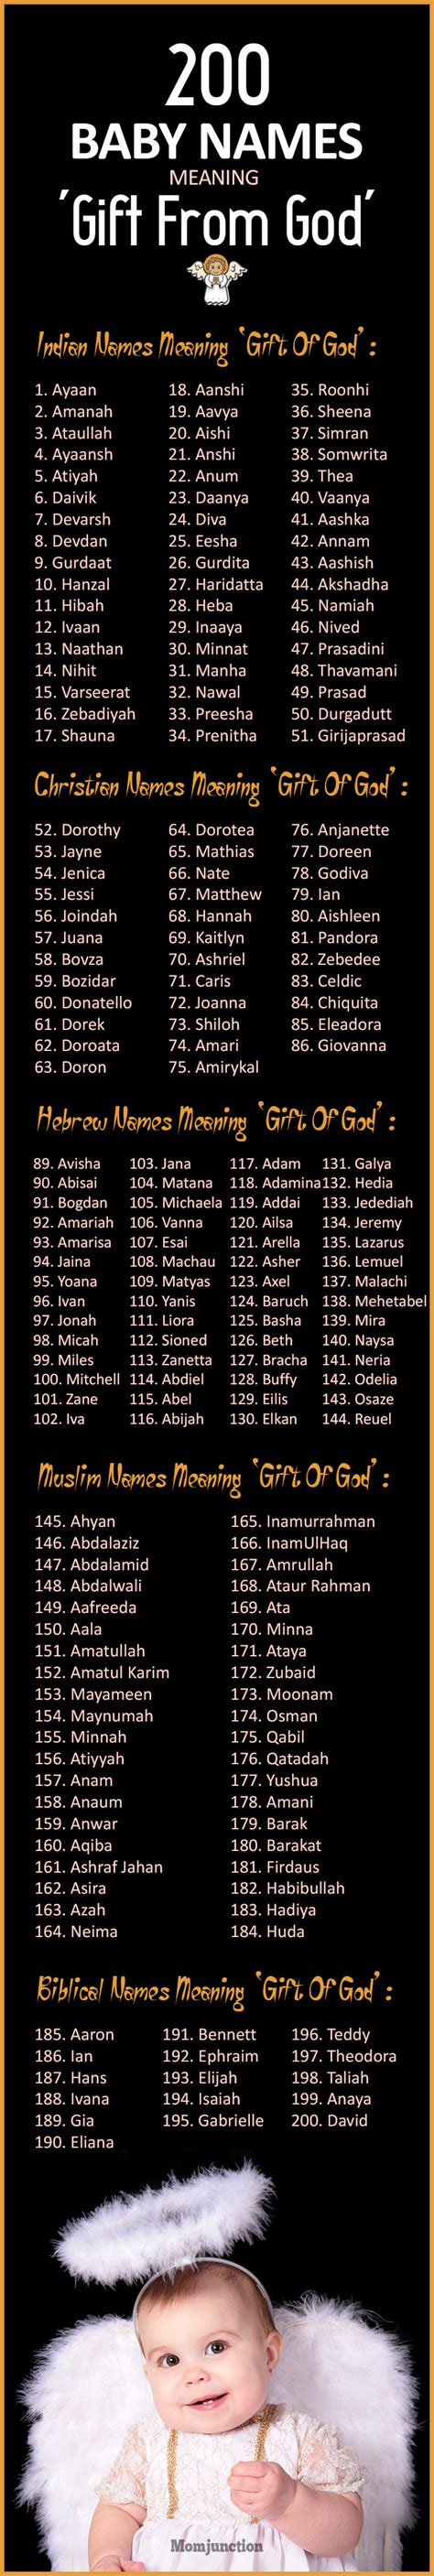 Name meaning gift from god - A Persian Royal name; Gift; … 2 Darren Little Great One; Gift; 56 Derina A Gifted Ruler; 6 Donata Gift from God; Given; Given by … 83 Doreen God's Gift; Gift; Gilded; … 2 Dorene Gift; Blonde; Brooding; 3 Dorina Brooding; Gift from God; From … 42 Dorita God's Gift; Originally a … 3 Dorota Gift of God 